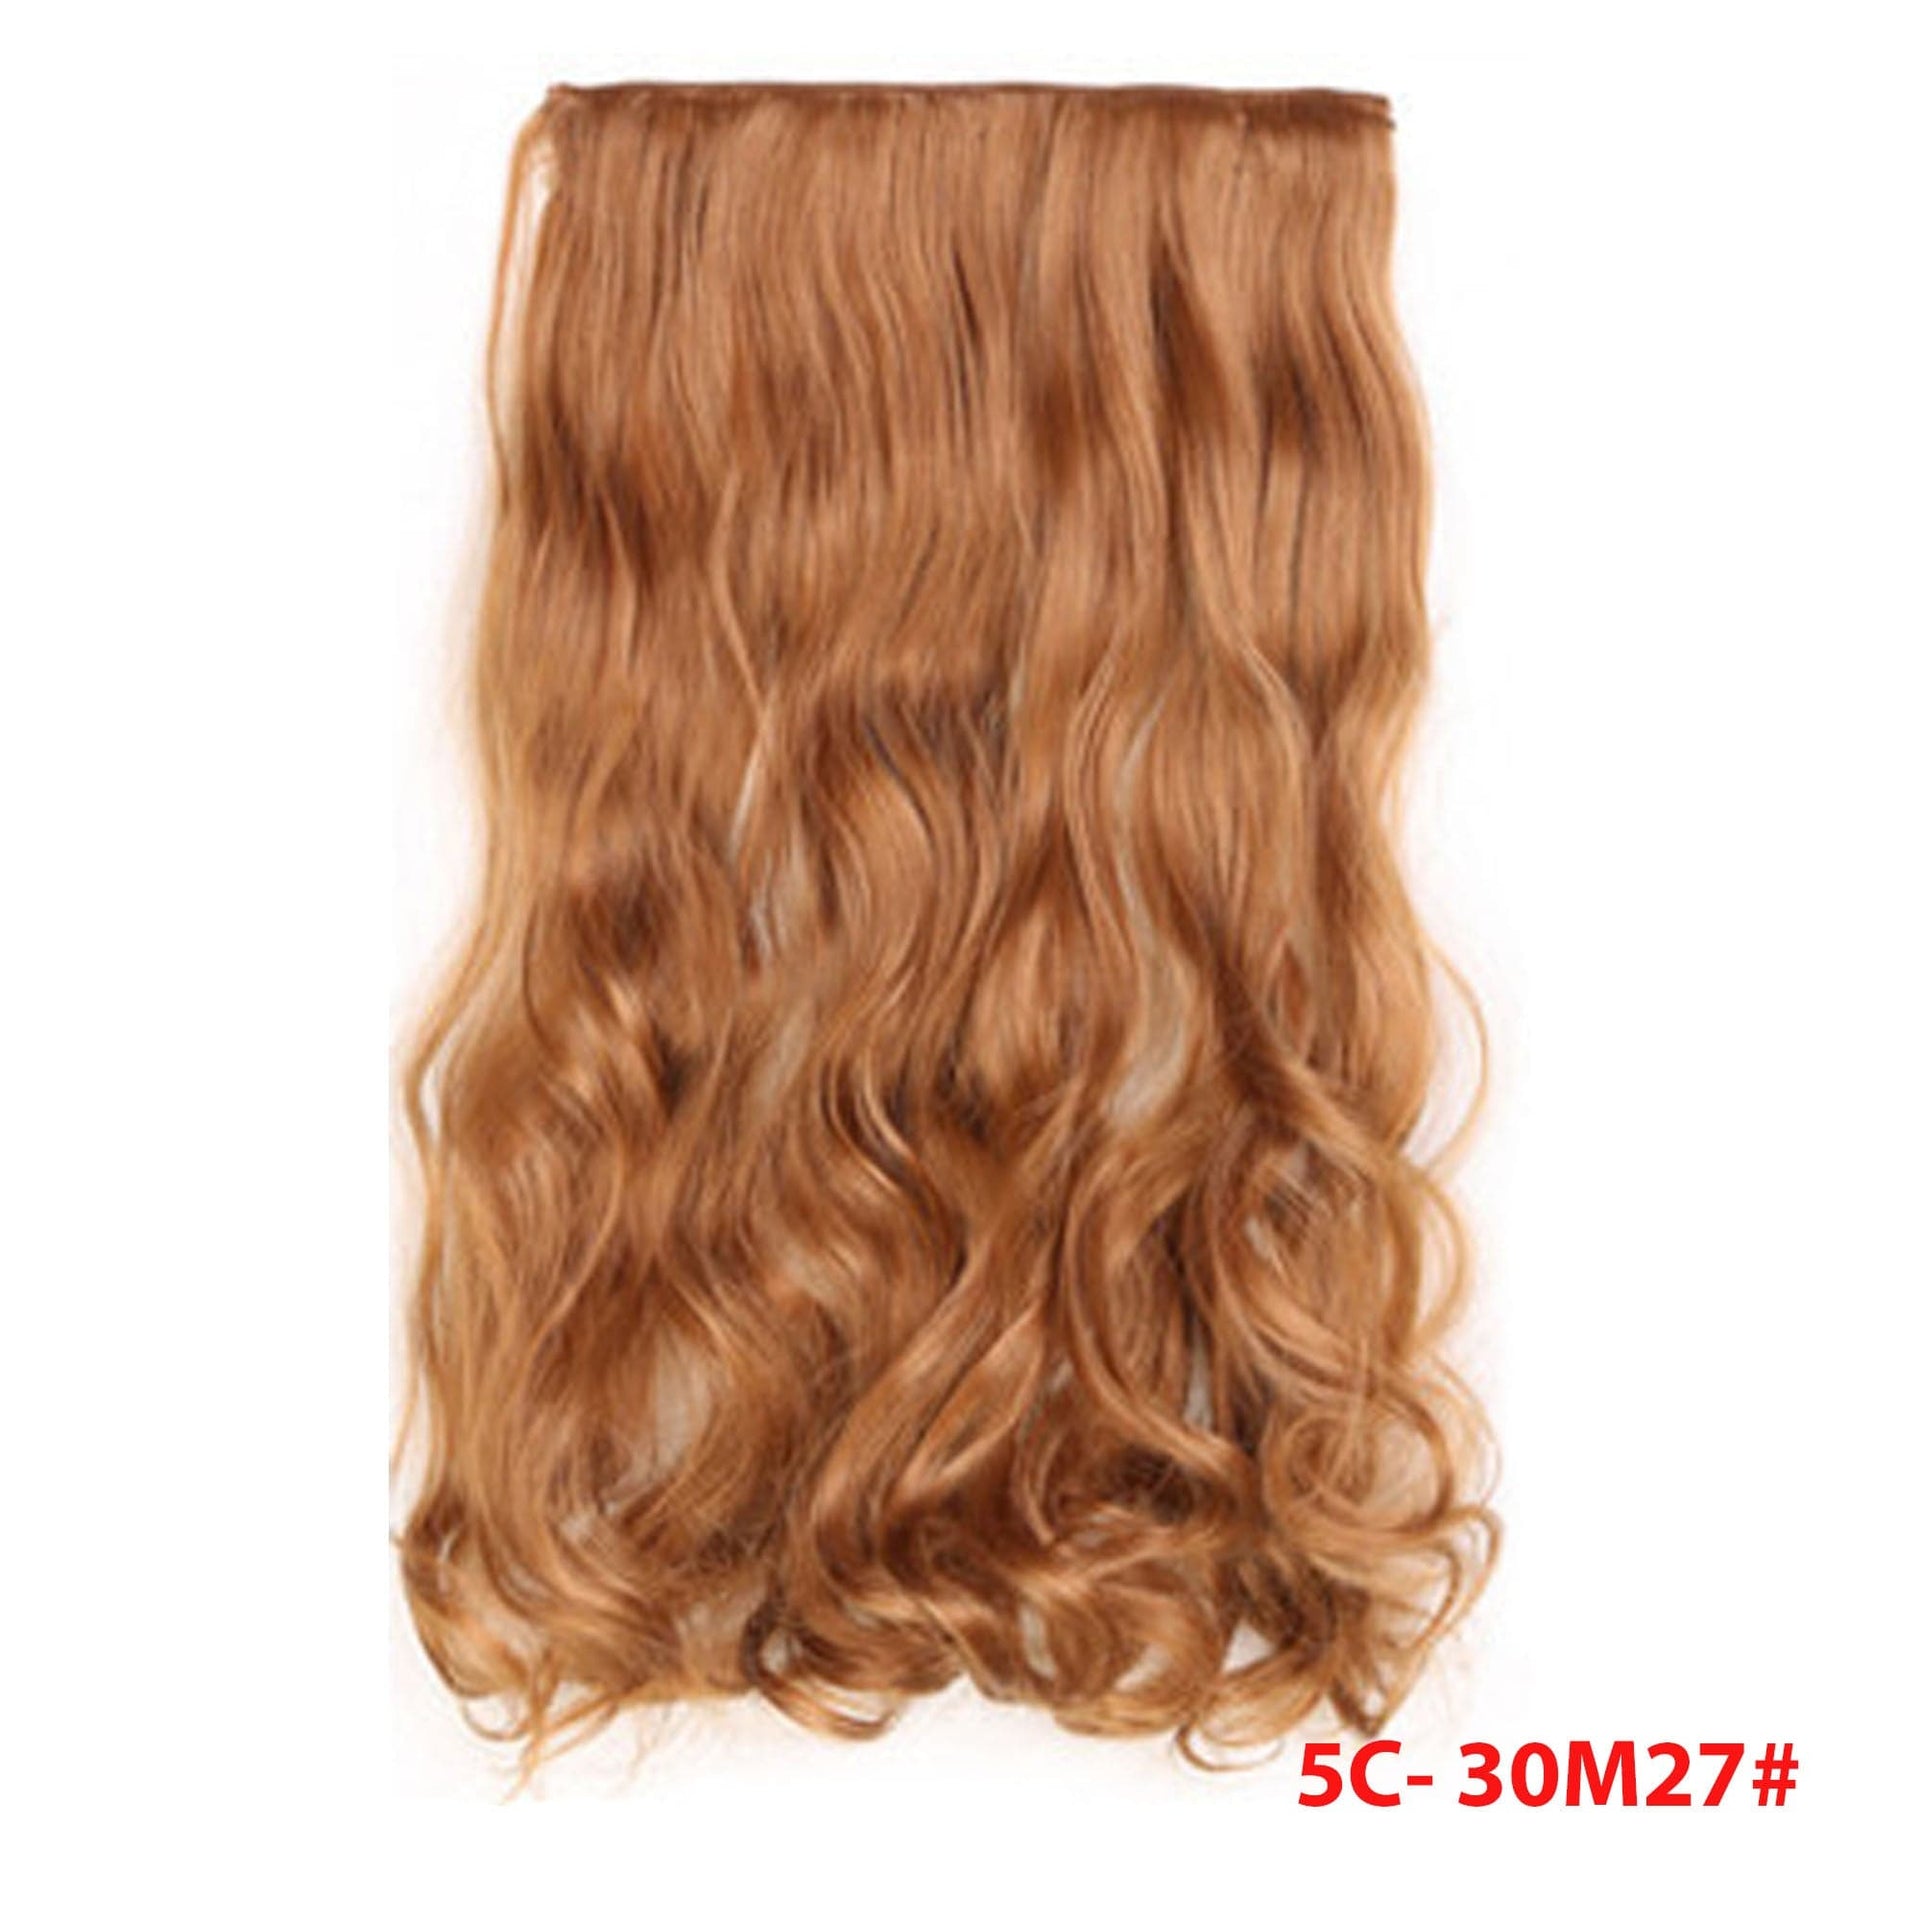 nevermindyrhead Women Clip In 3/4 Full Head Long Curly Synthetic Hair Extensions 5 Clips 24